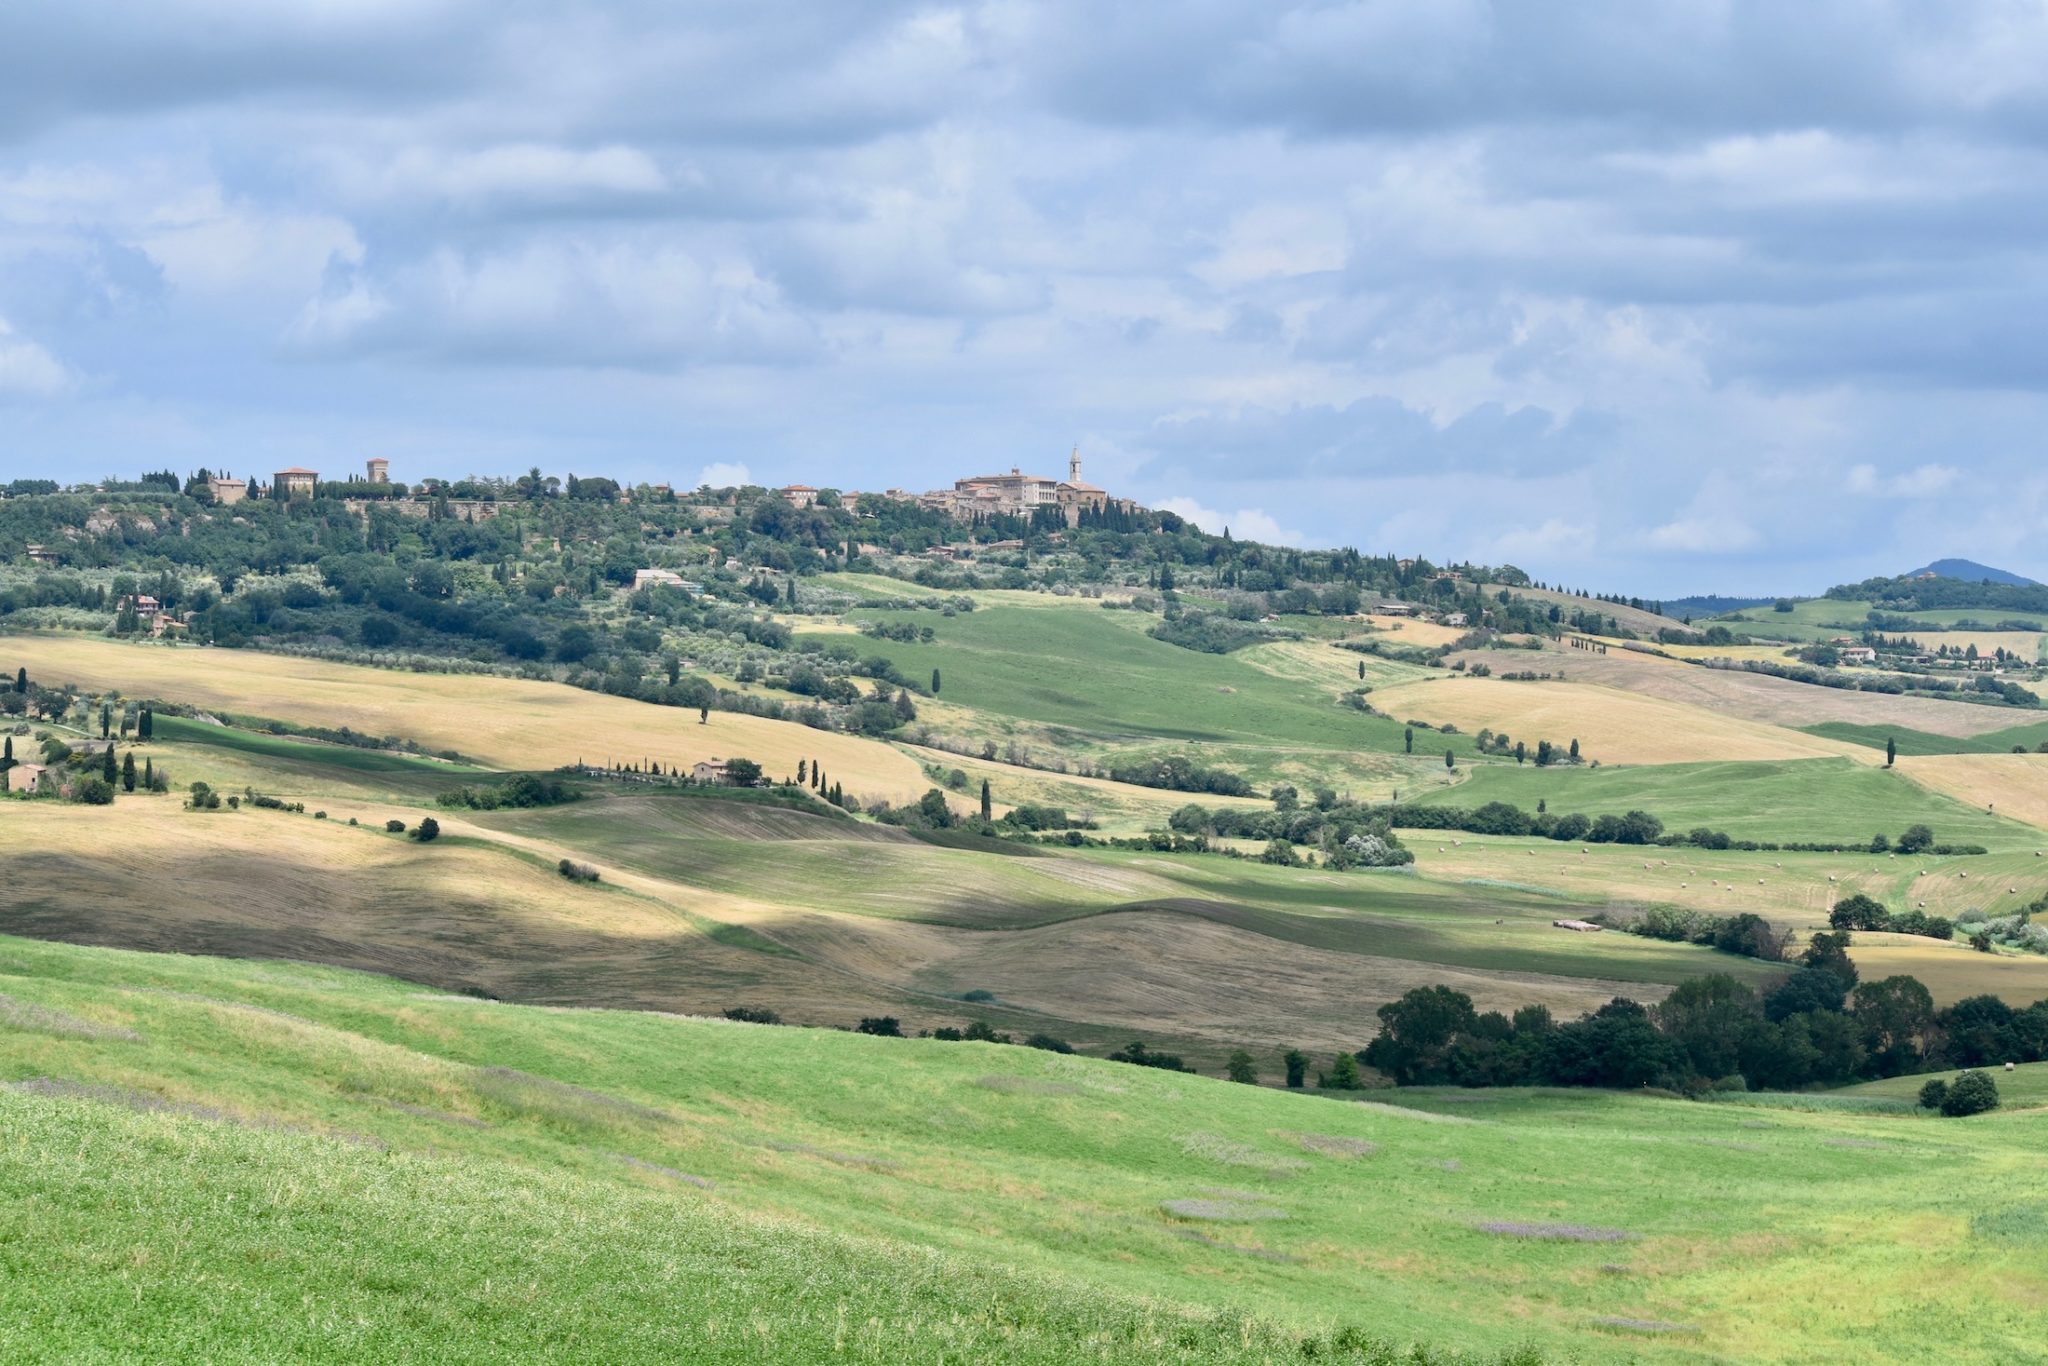 The rolling hills of Val d'Orcia in Tuscany with a hilltop town in the distance